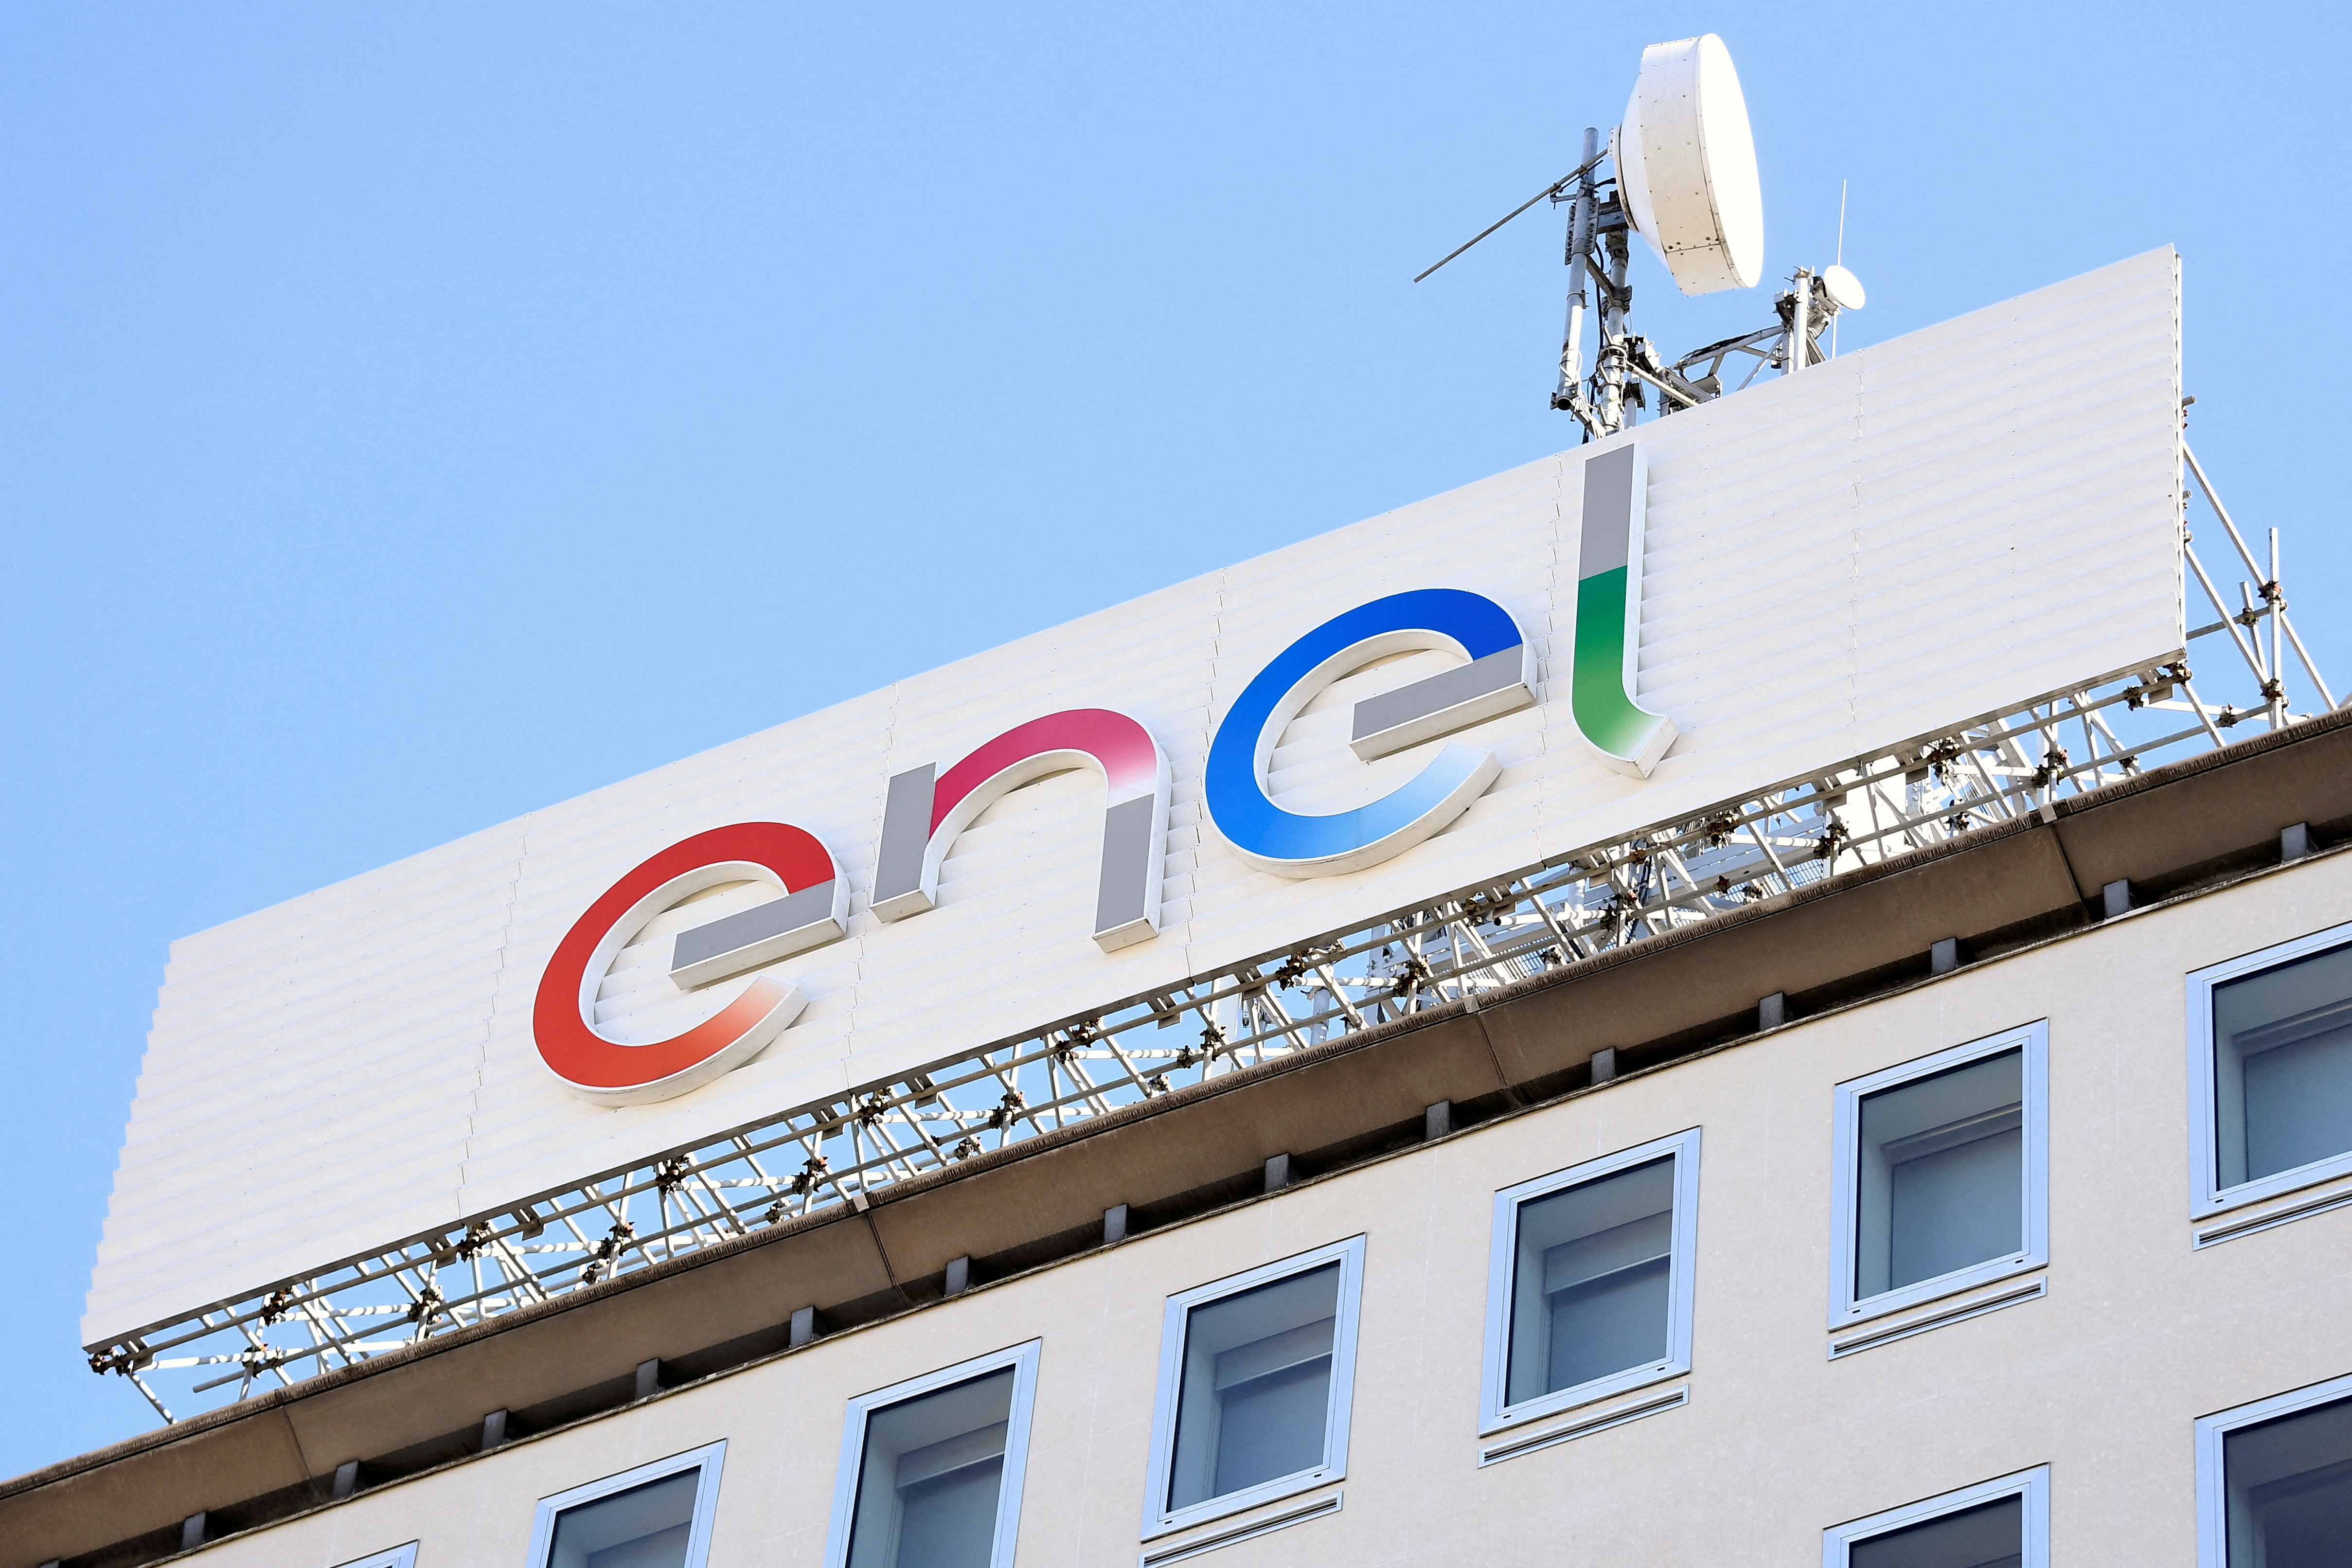 Milan, Italy - July 21, 2015: Enel logo on a wall. Enel Group, is an  Italian multinational energy company that is active in the sectors of  electricity Stock Photo - Alamy